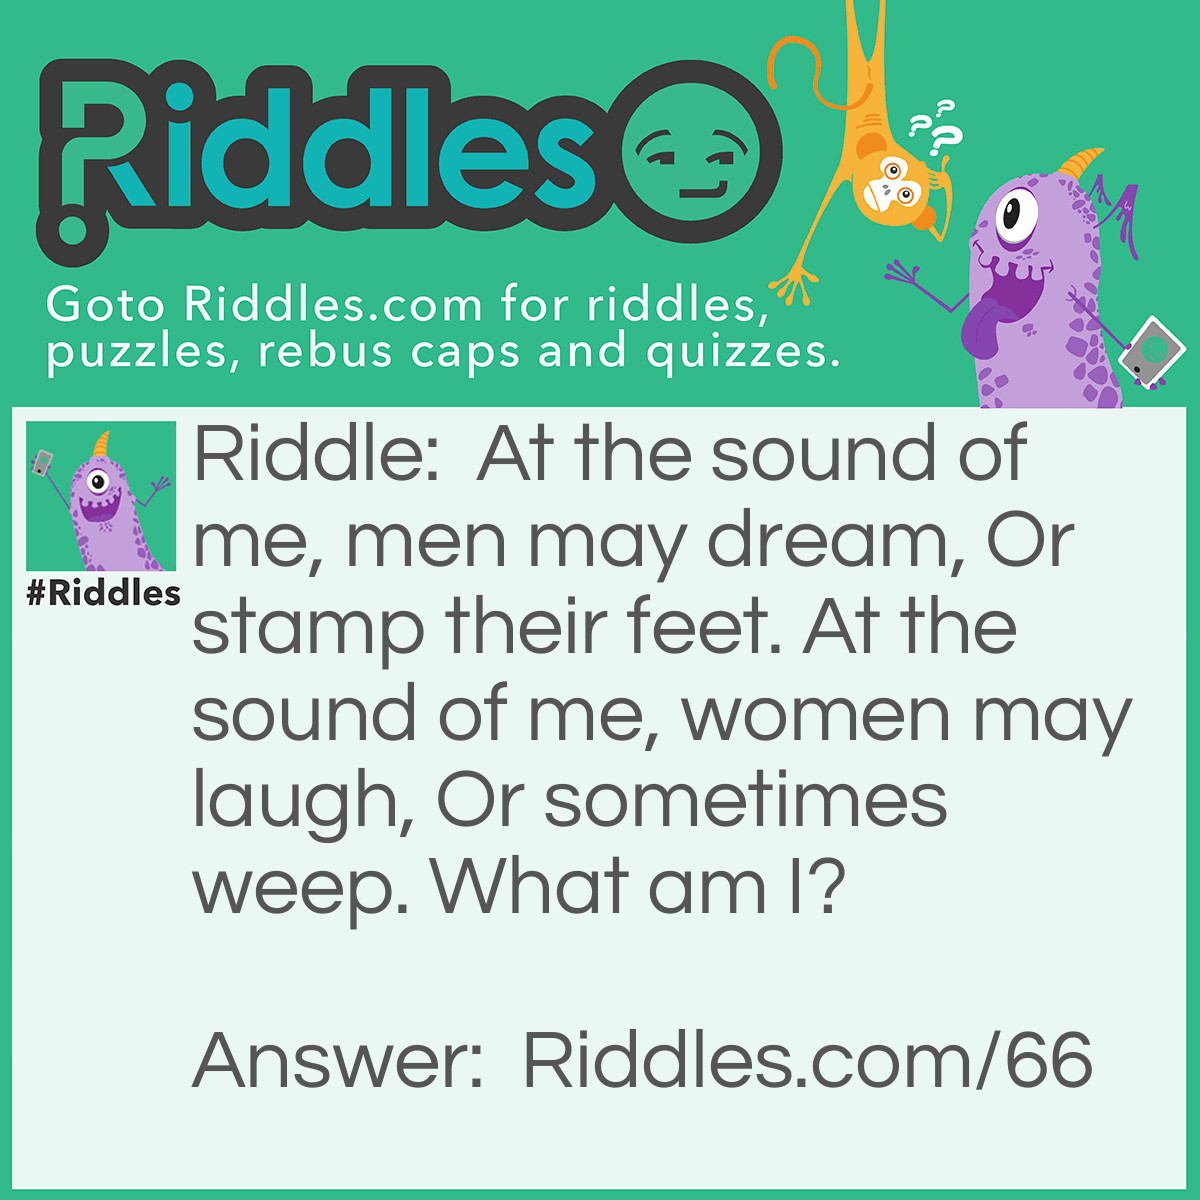 Riddle: At the sound of me, men may dream, Or stamp their feet. At the sound of me, women may <a title="laugh" href="../../../funny-riddles">laugh</a>, Or sometimes weep. What am I? Answer: I am Music!